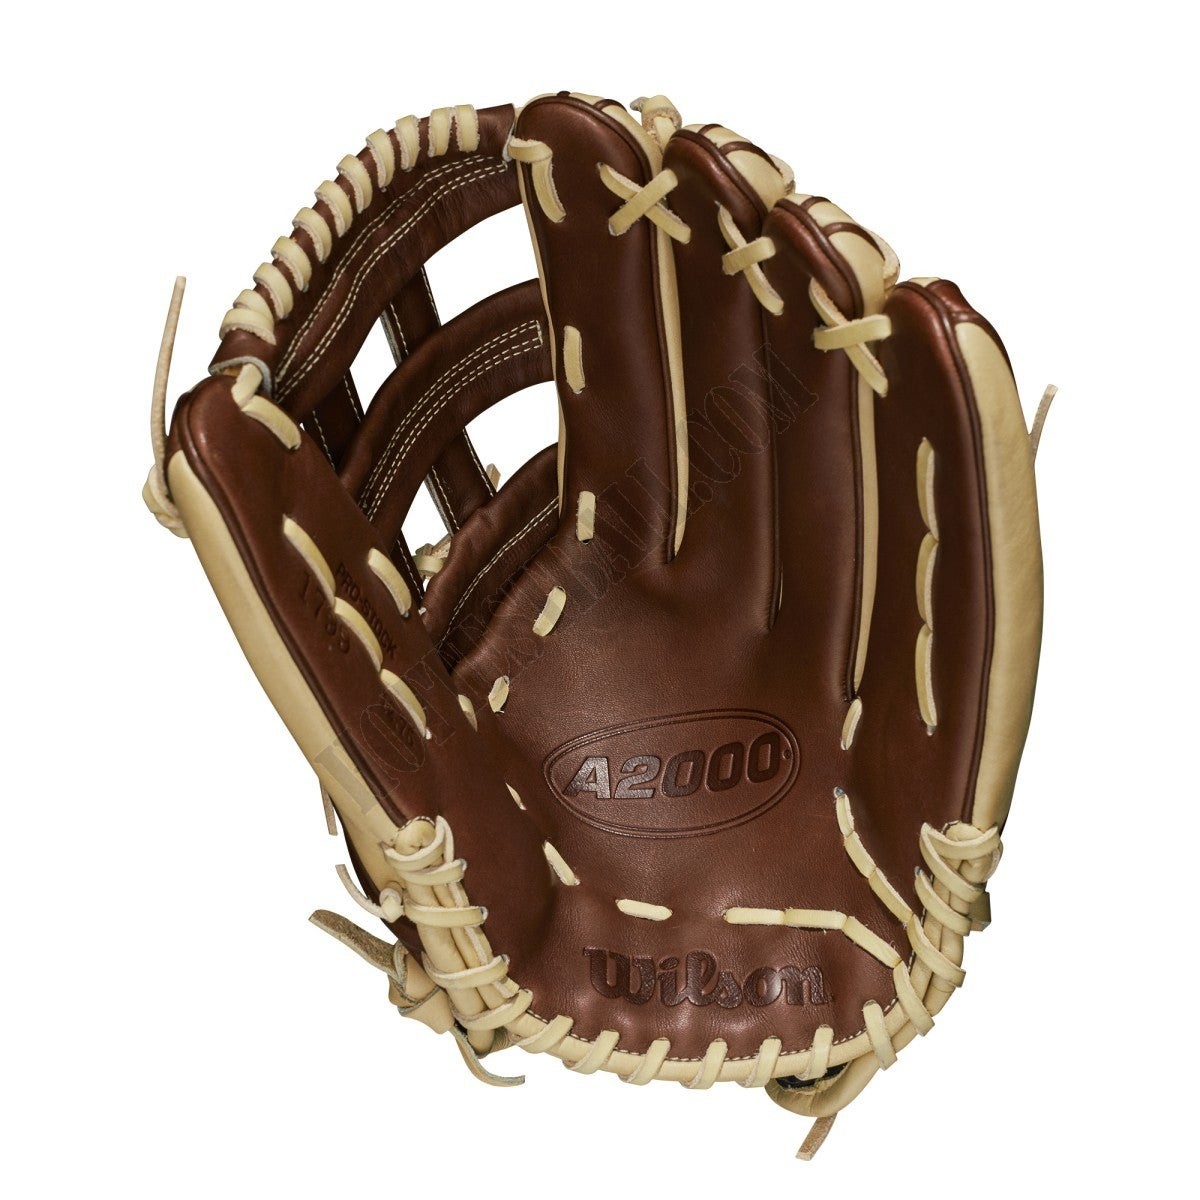 2021 A2000 1799 12.75" Outfield Baseball Glove ● Wilson Promotions - -2